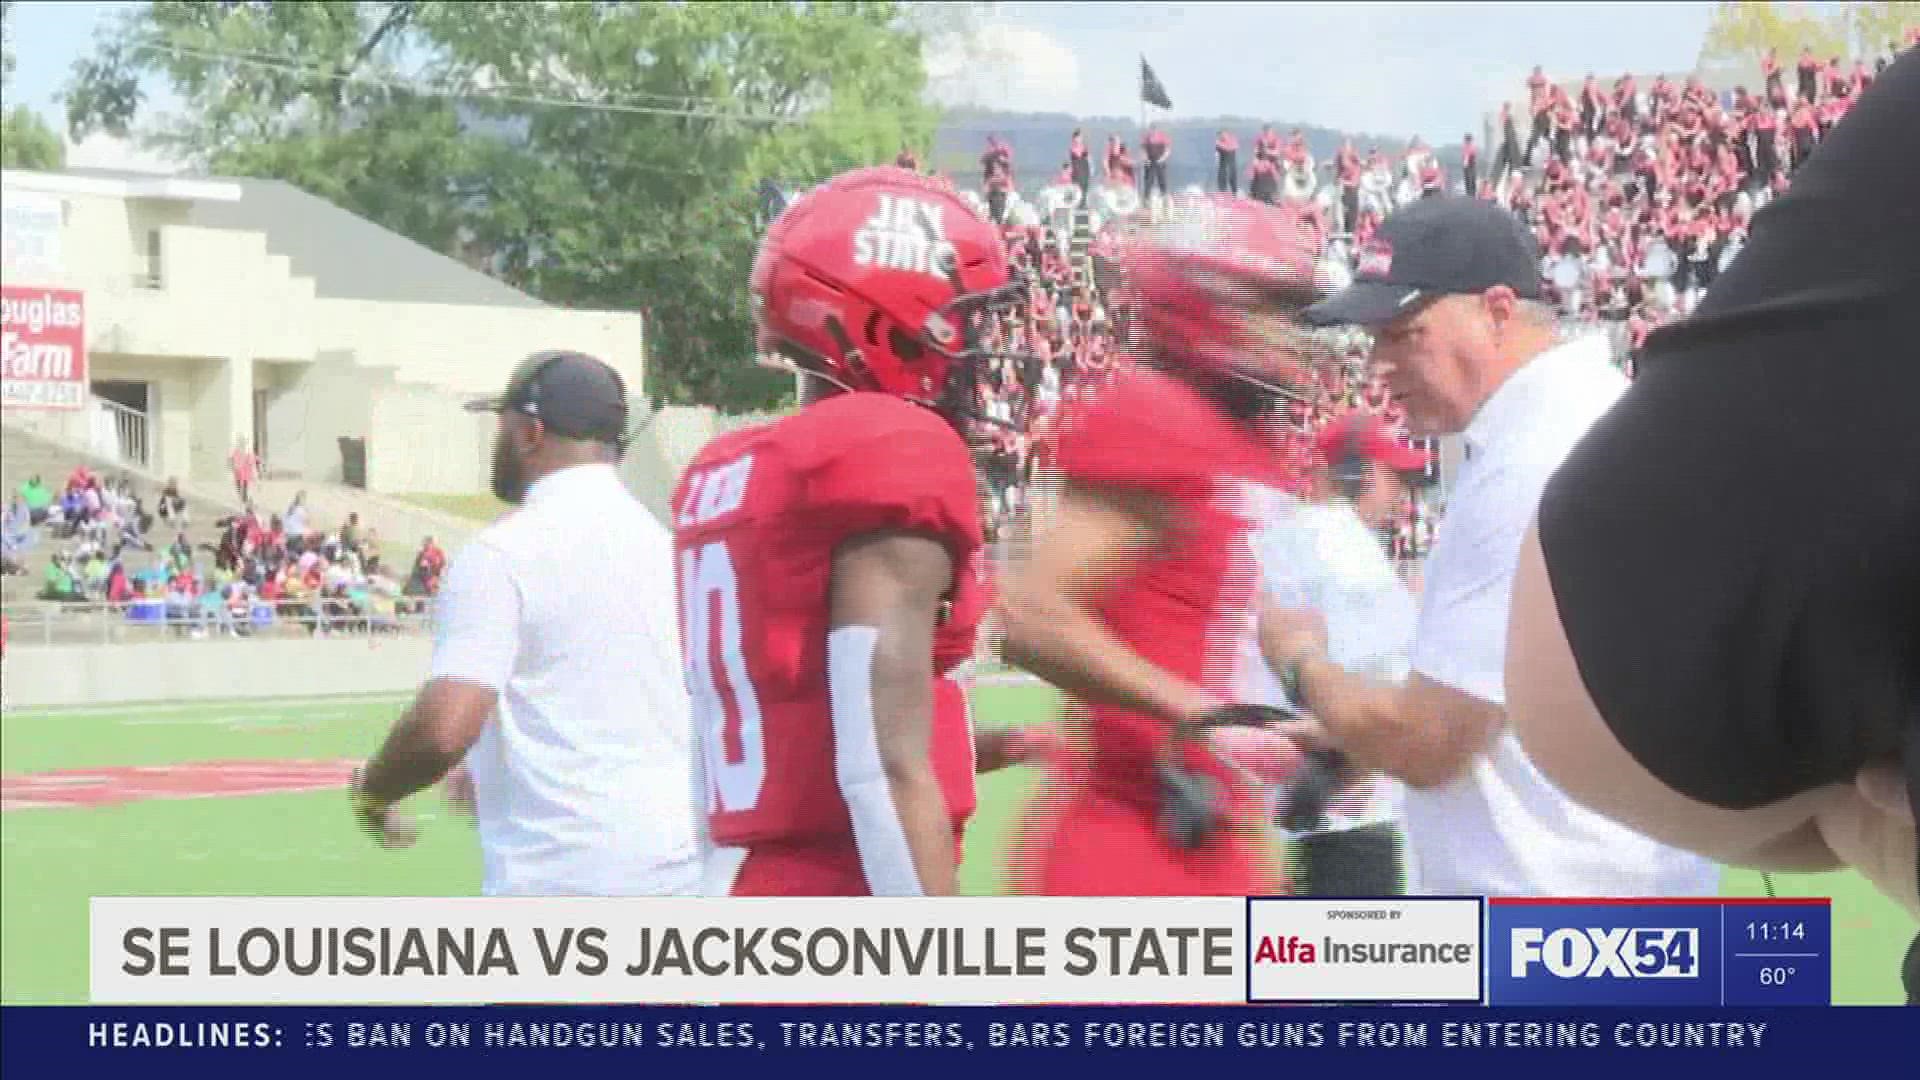 Southeastern Louisiana scored 18 unanswered second-half points to defeat Jacksonville State 31-14 in a non-conference matchup